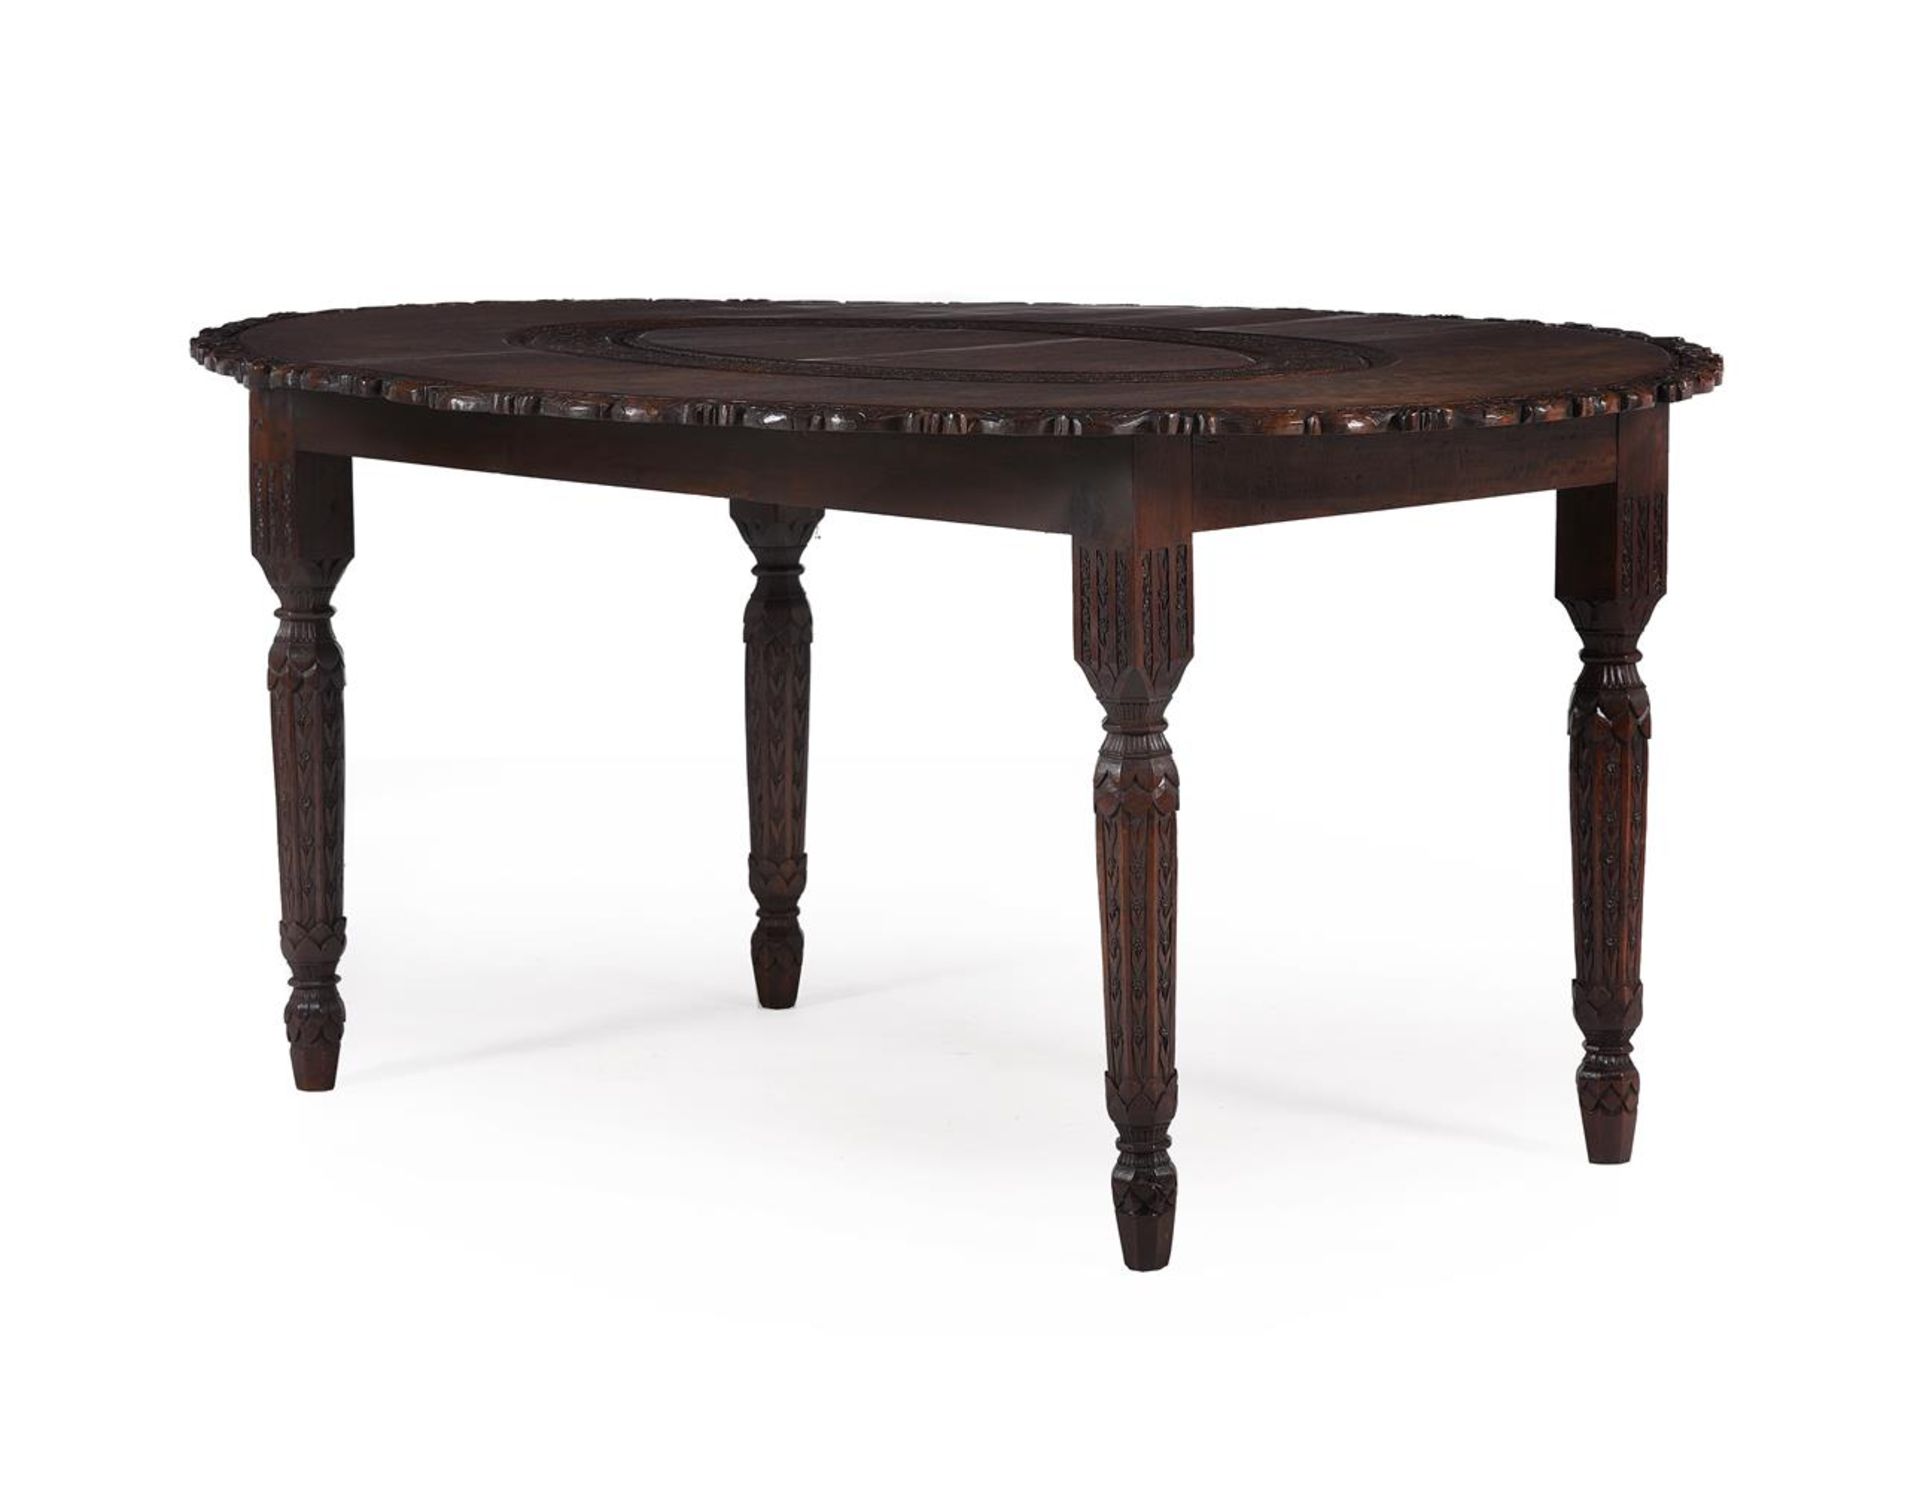 AN ANGLO INDIAN CARVED EXOTIC HARDWOOD CENTRE OR DINING TABLE, 19TH CENTURY